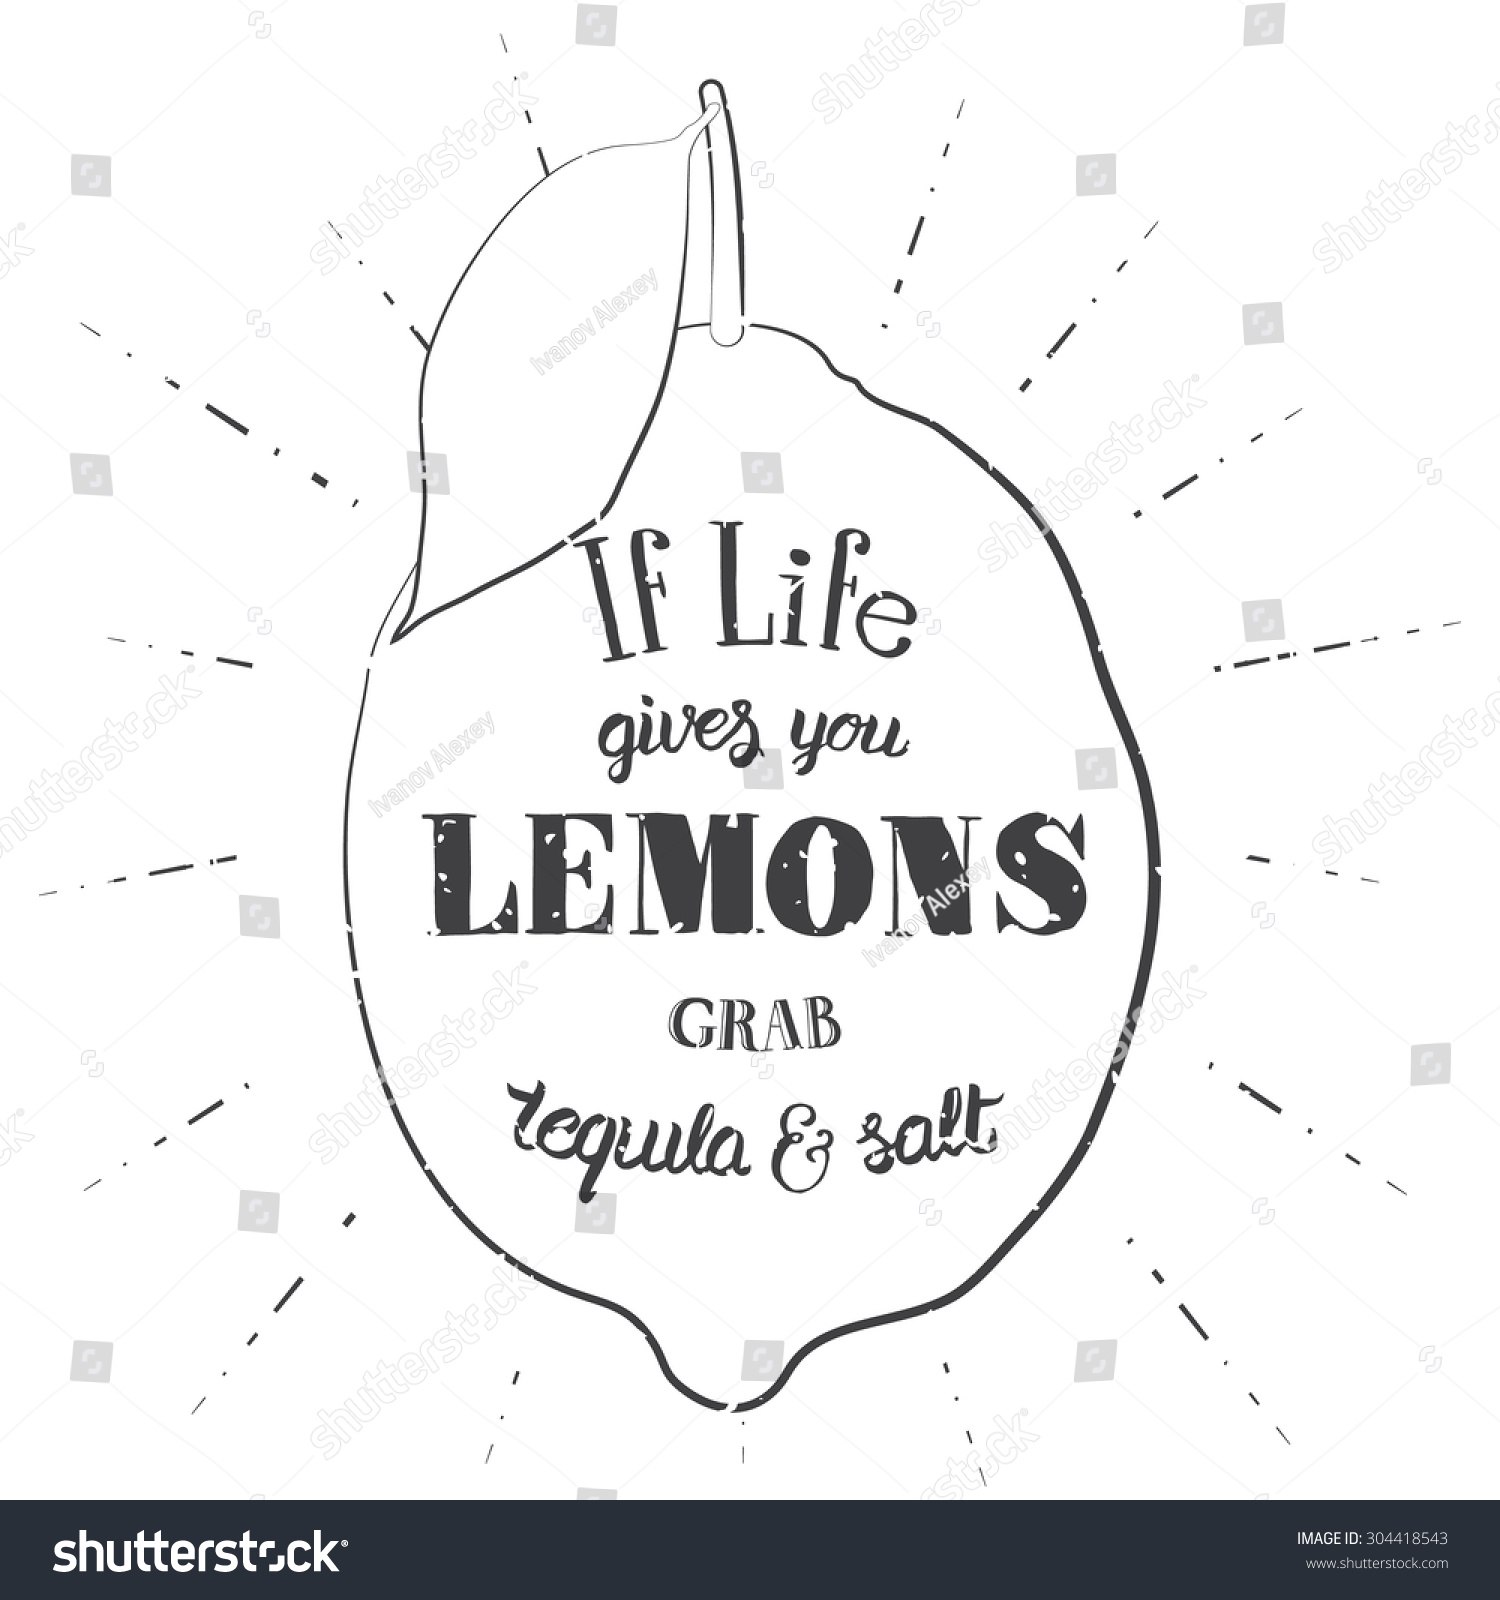 quotes like when life gives you lemons quotes when life gives you lemons when life gives you life gives